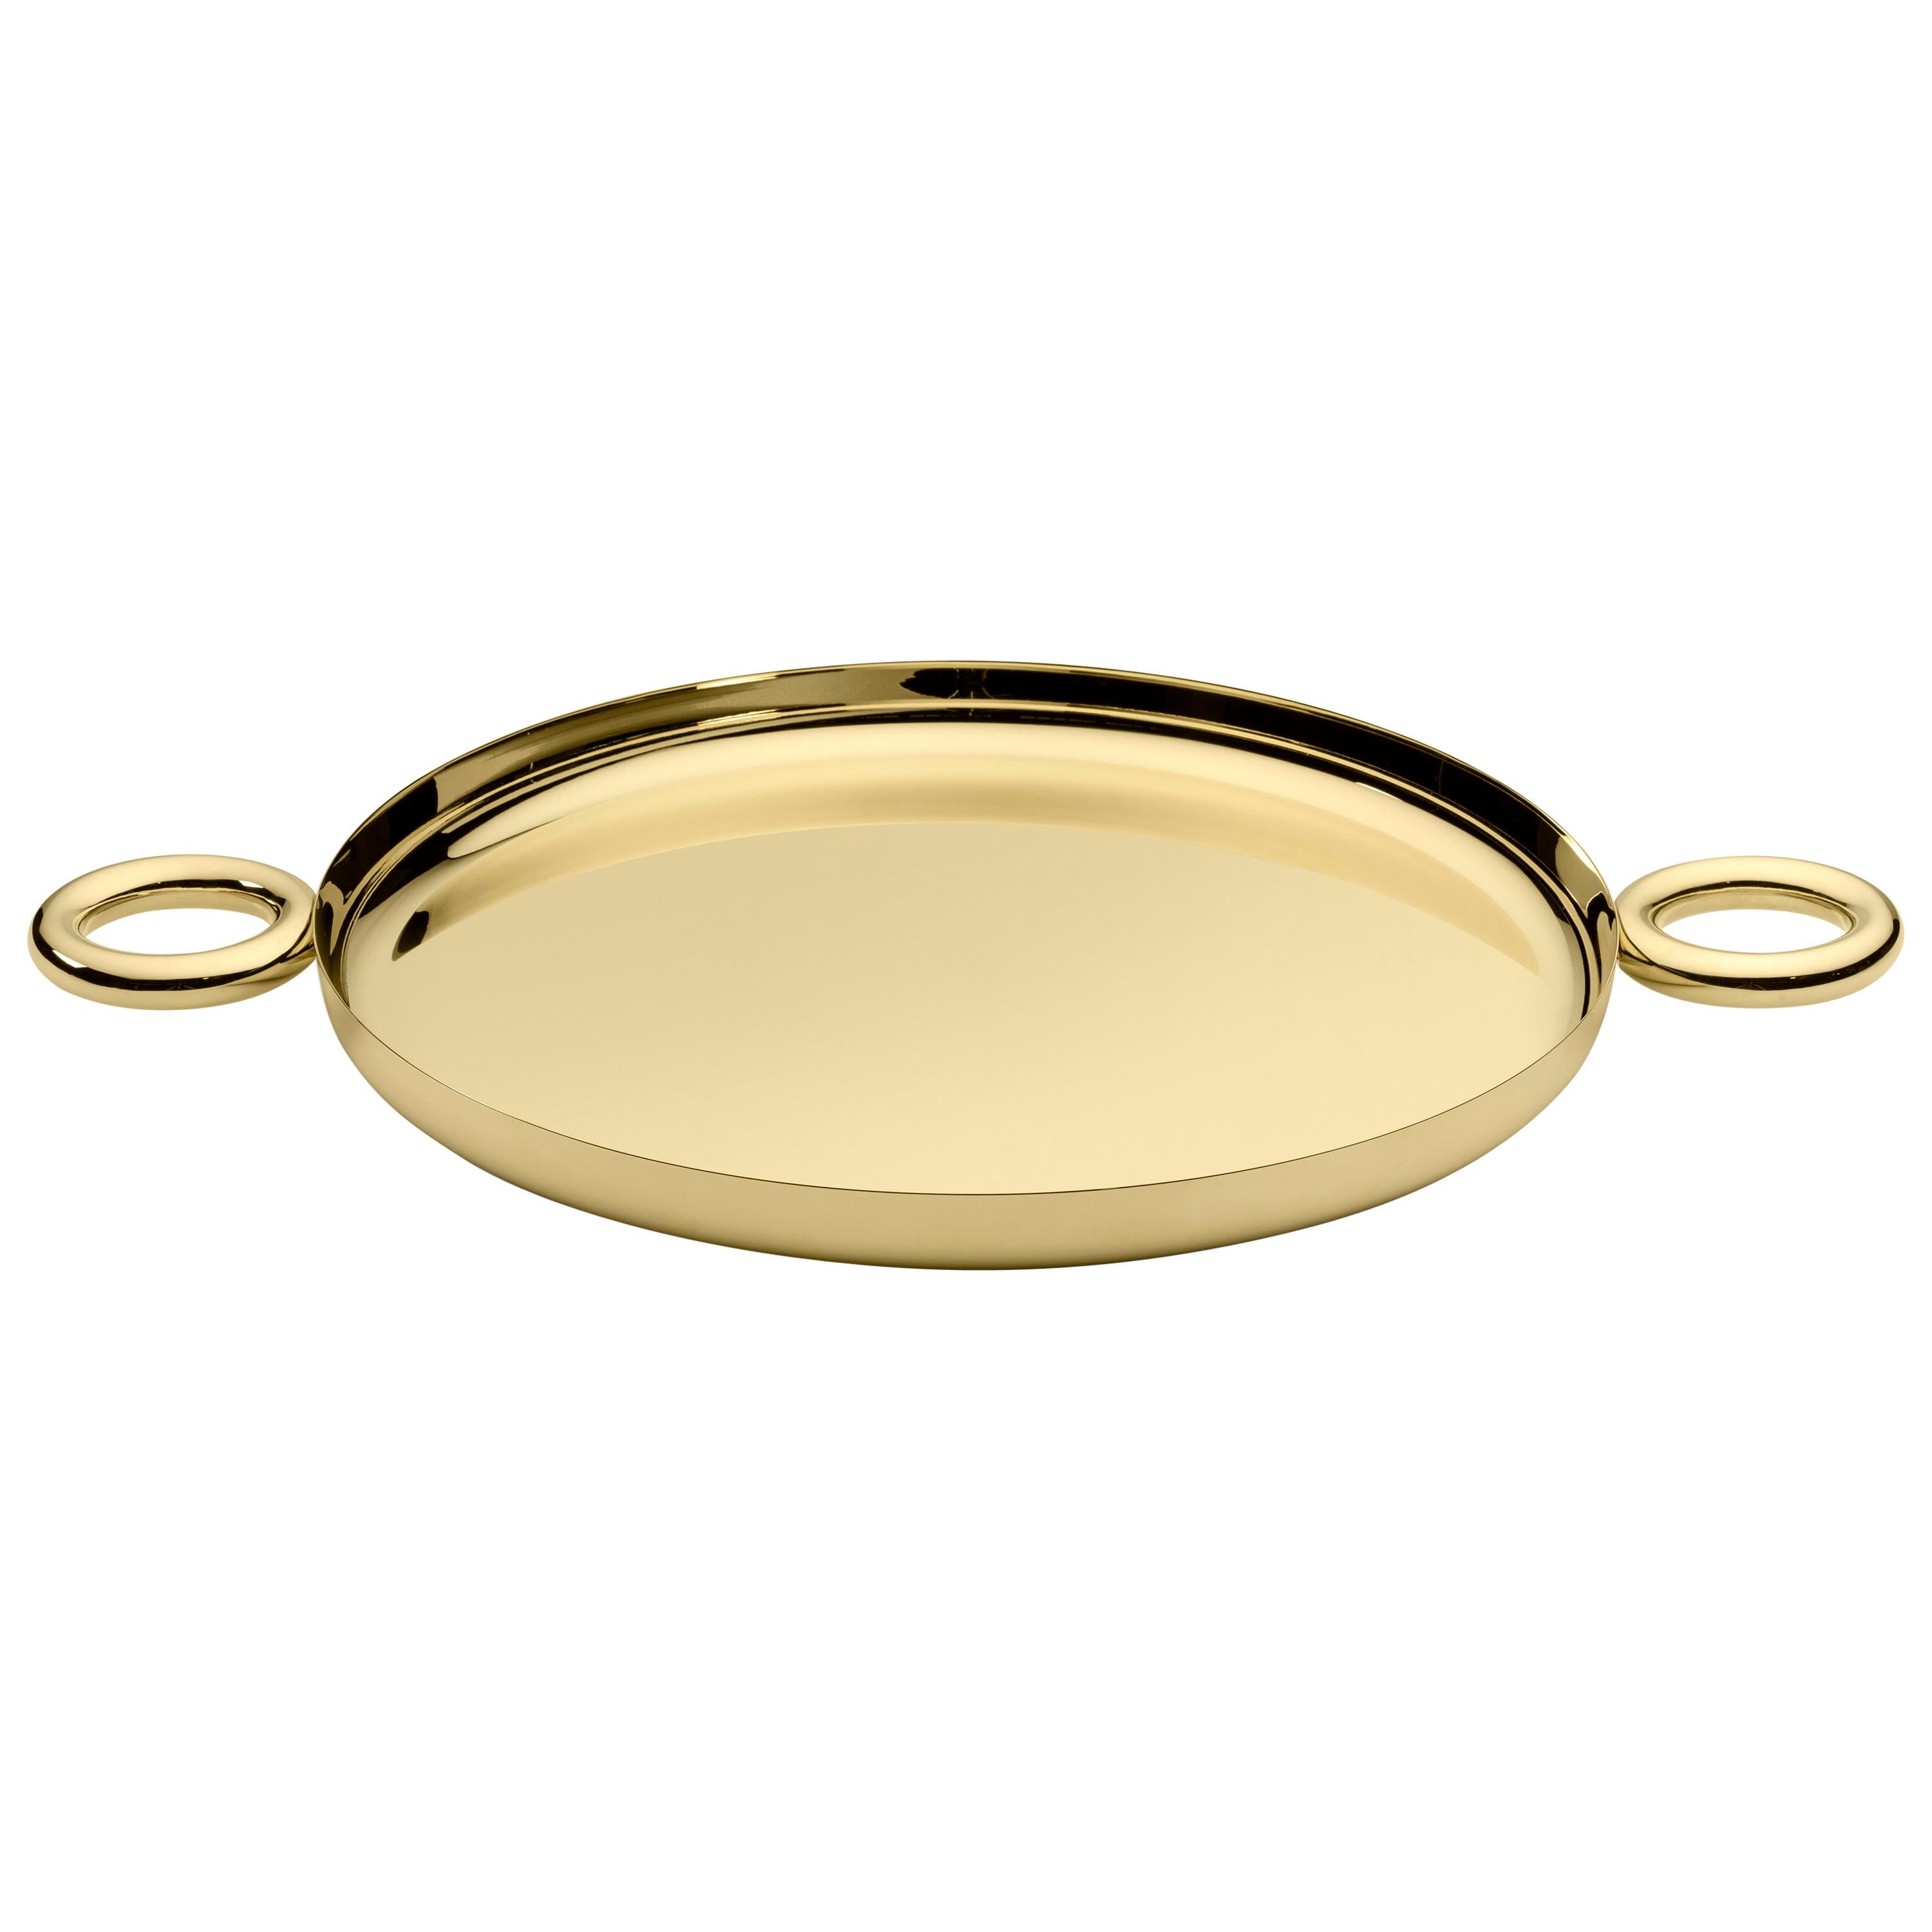 O Tray in 24K Gold Plated Stainless Steel by Richard Hutten For Sale